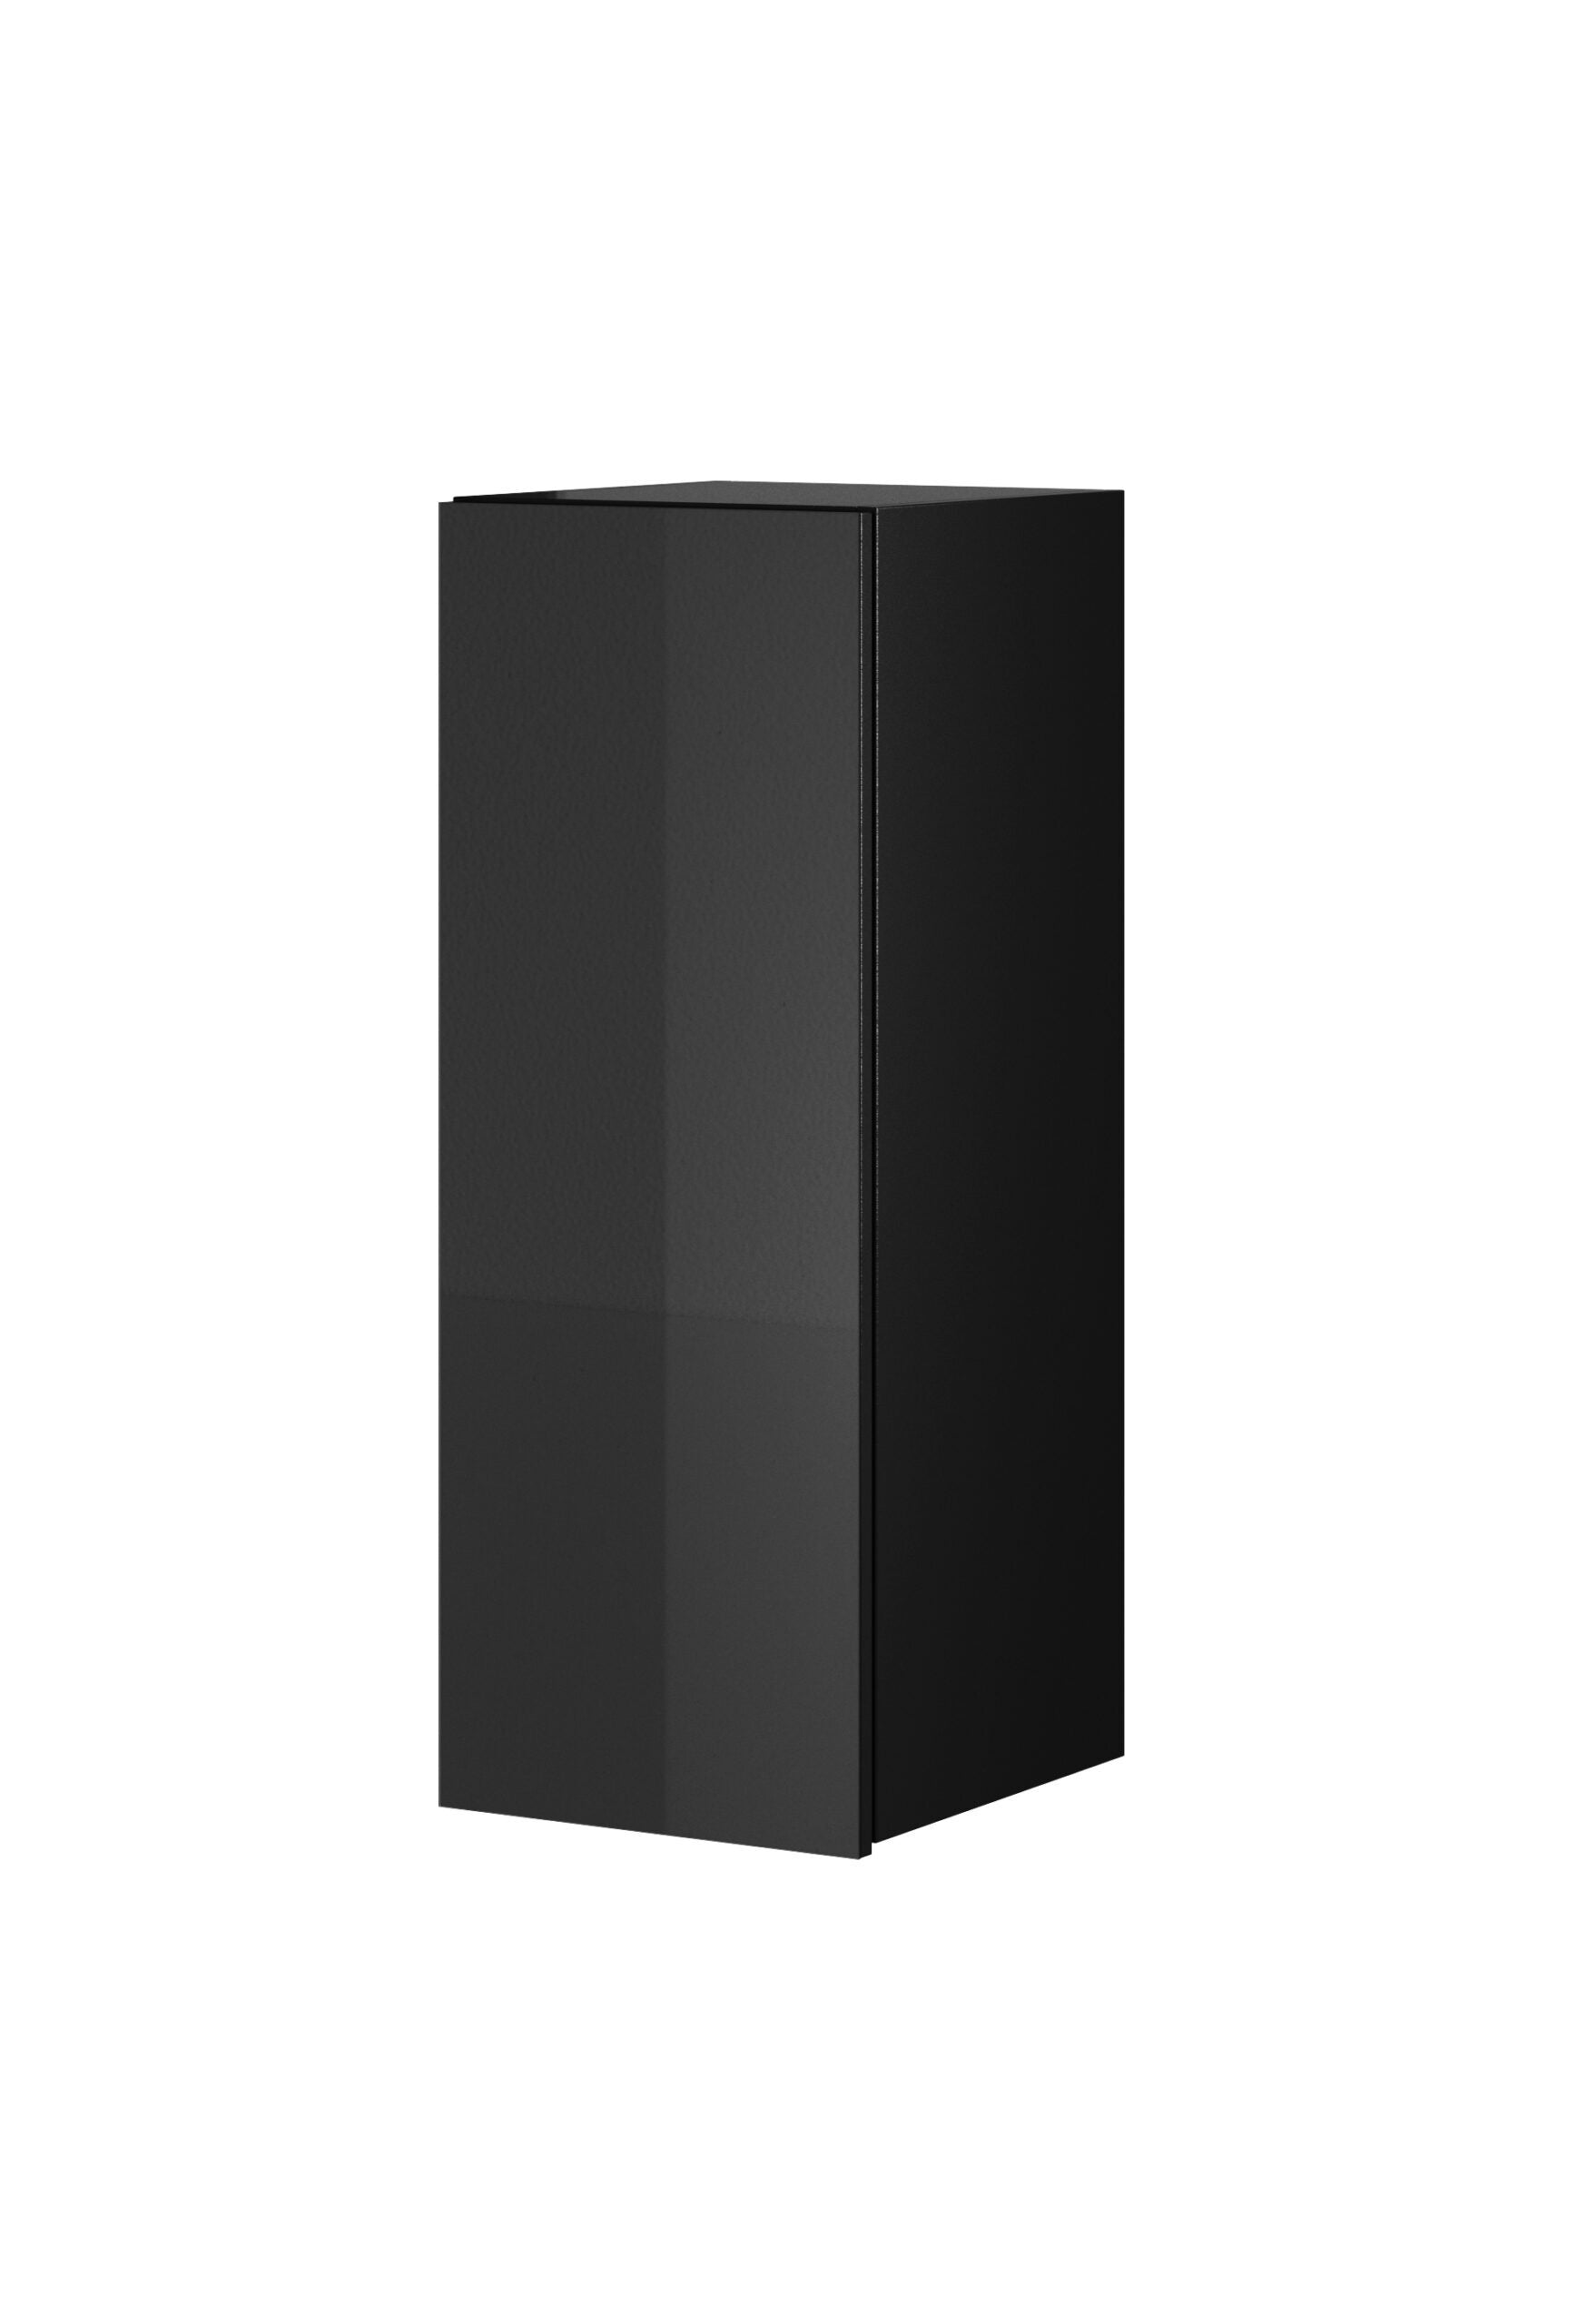 View Helio 08 Wall Cabinet Black Glass 35cm information